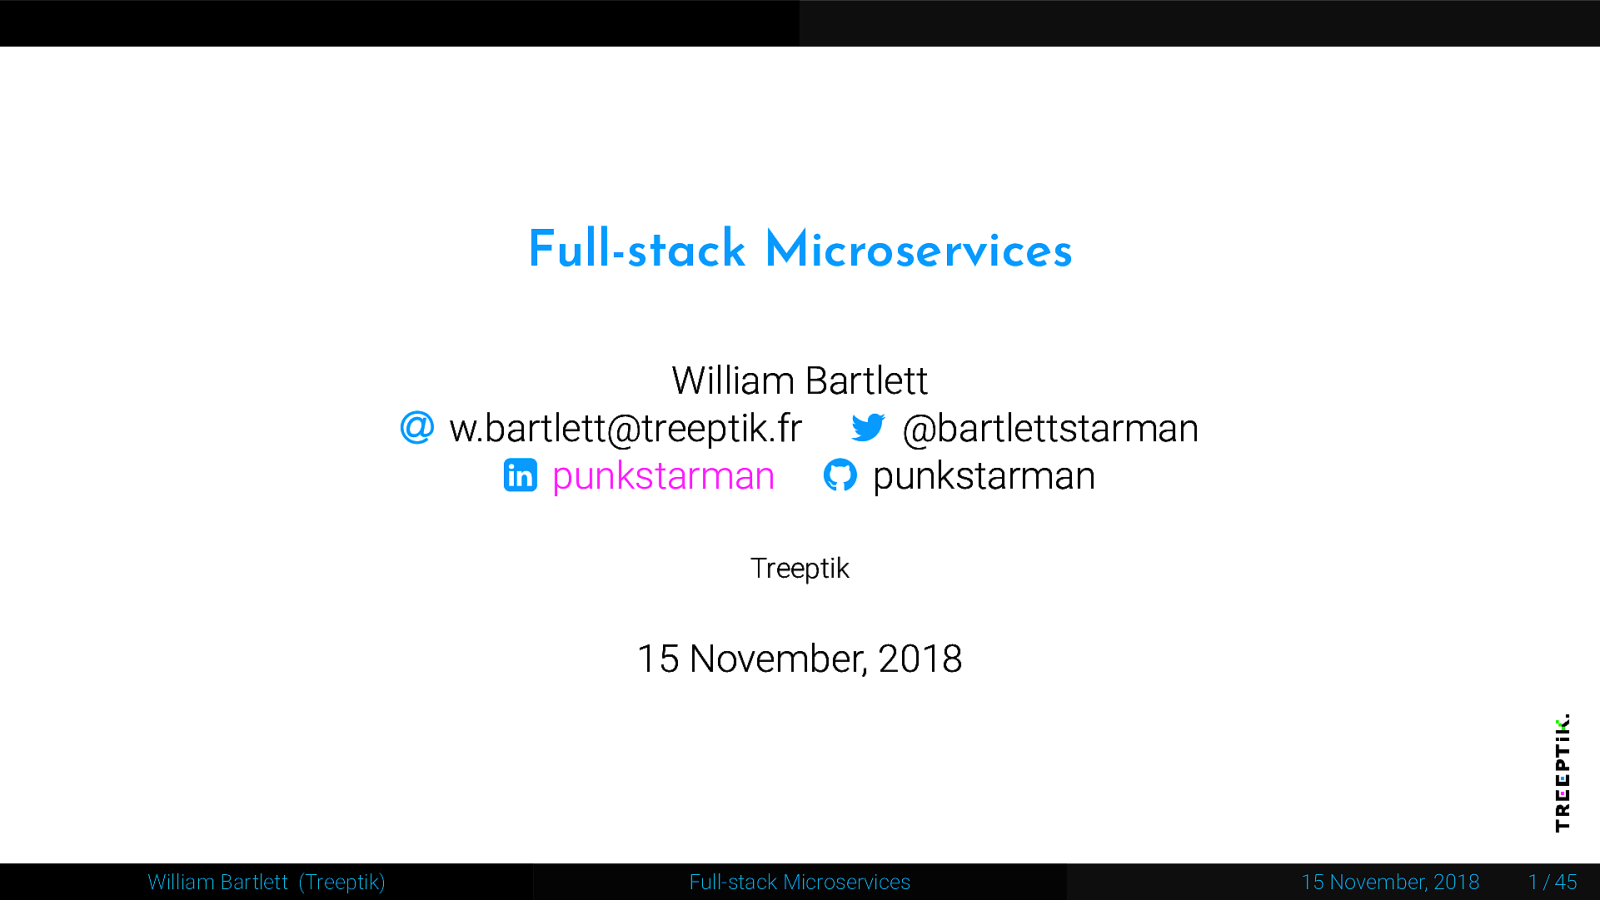 Full-stack Microservices